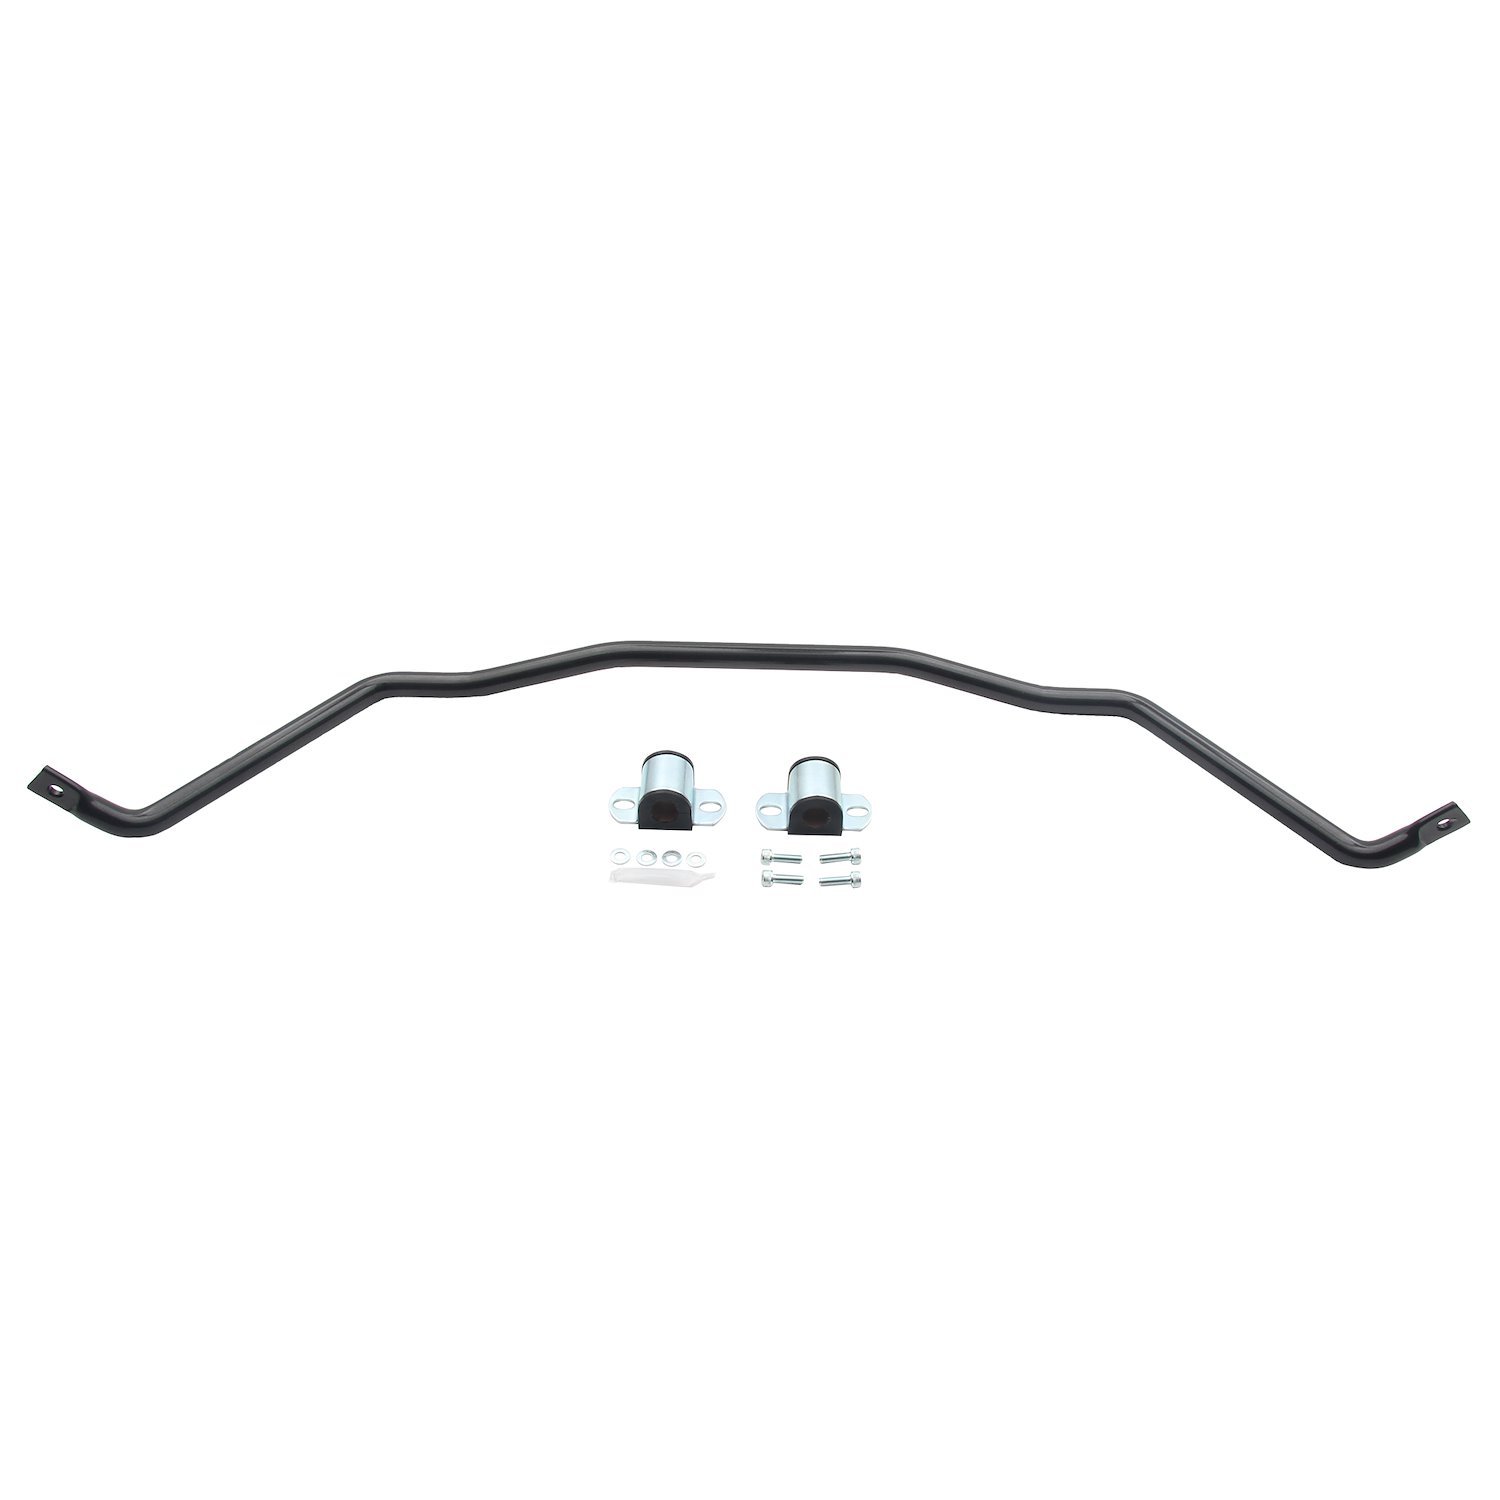 50210 Anti-Swaybar - Front for 90-97 Toyota Celica